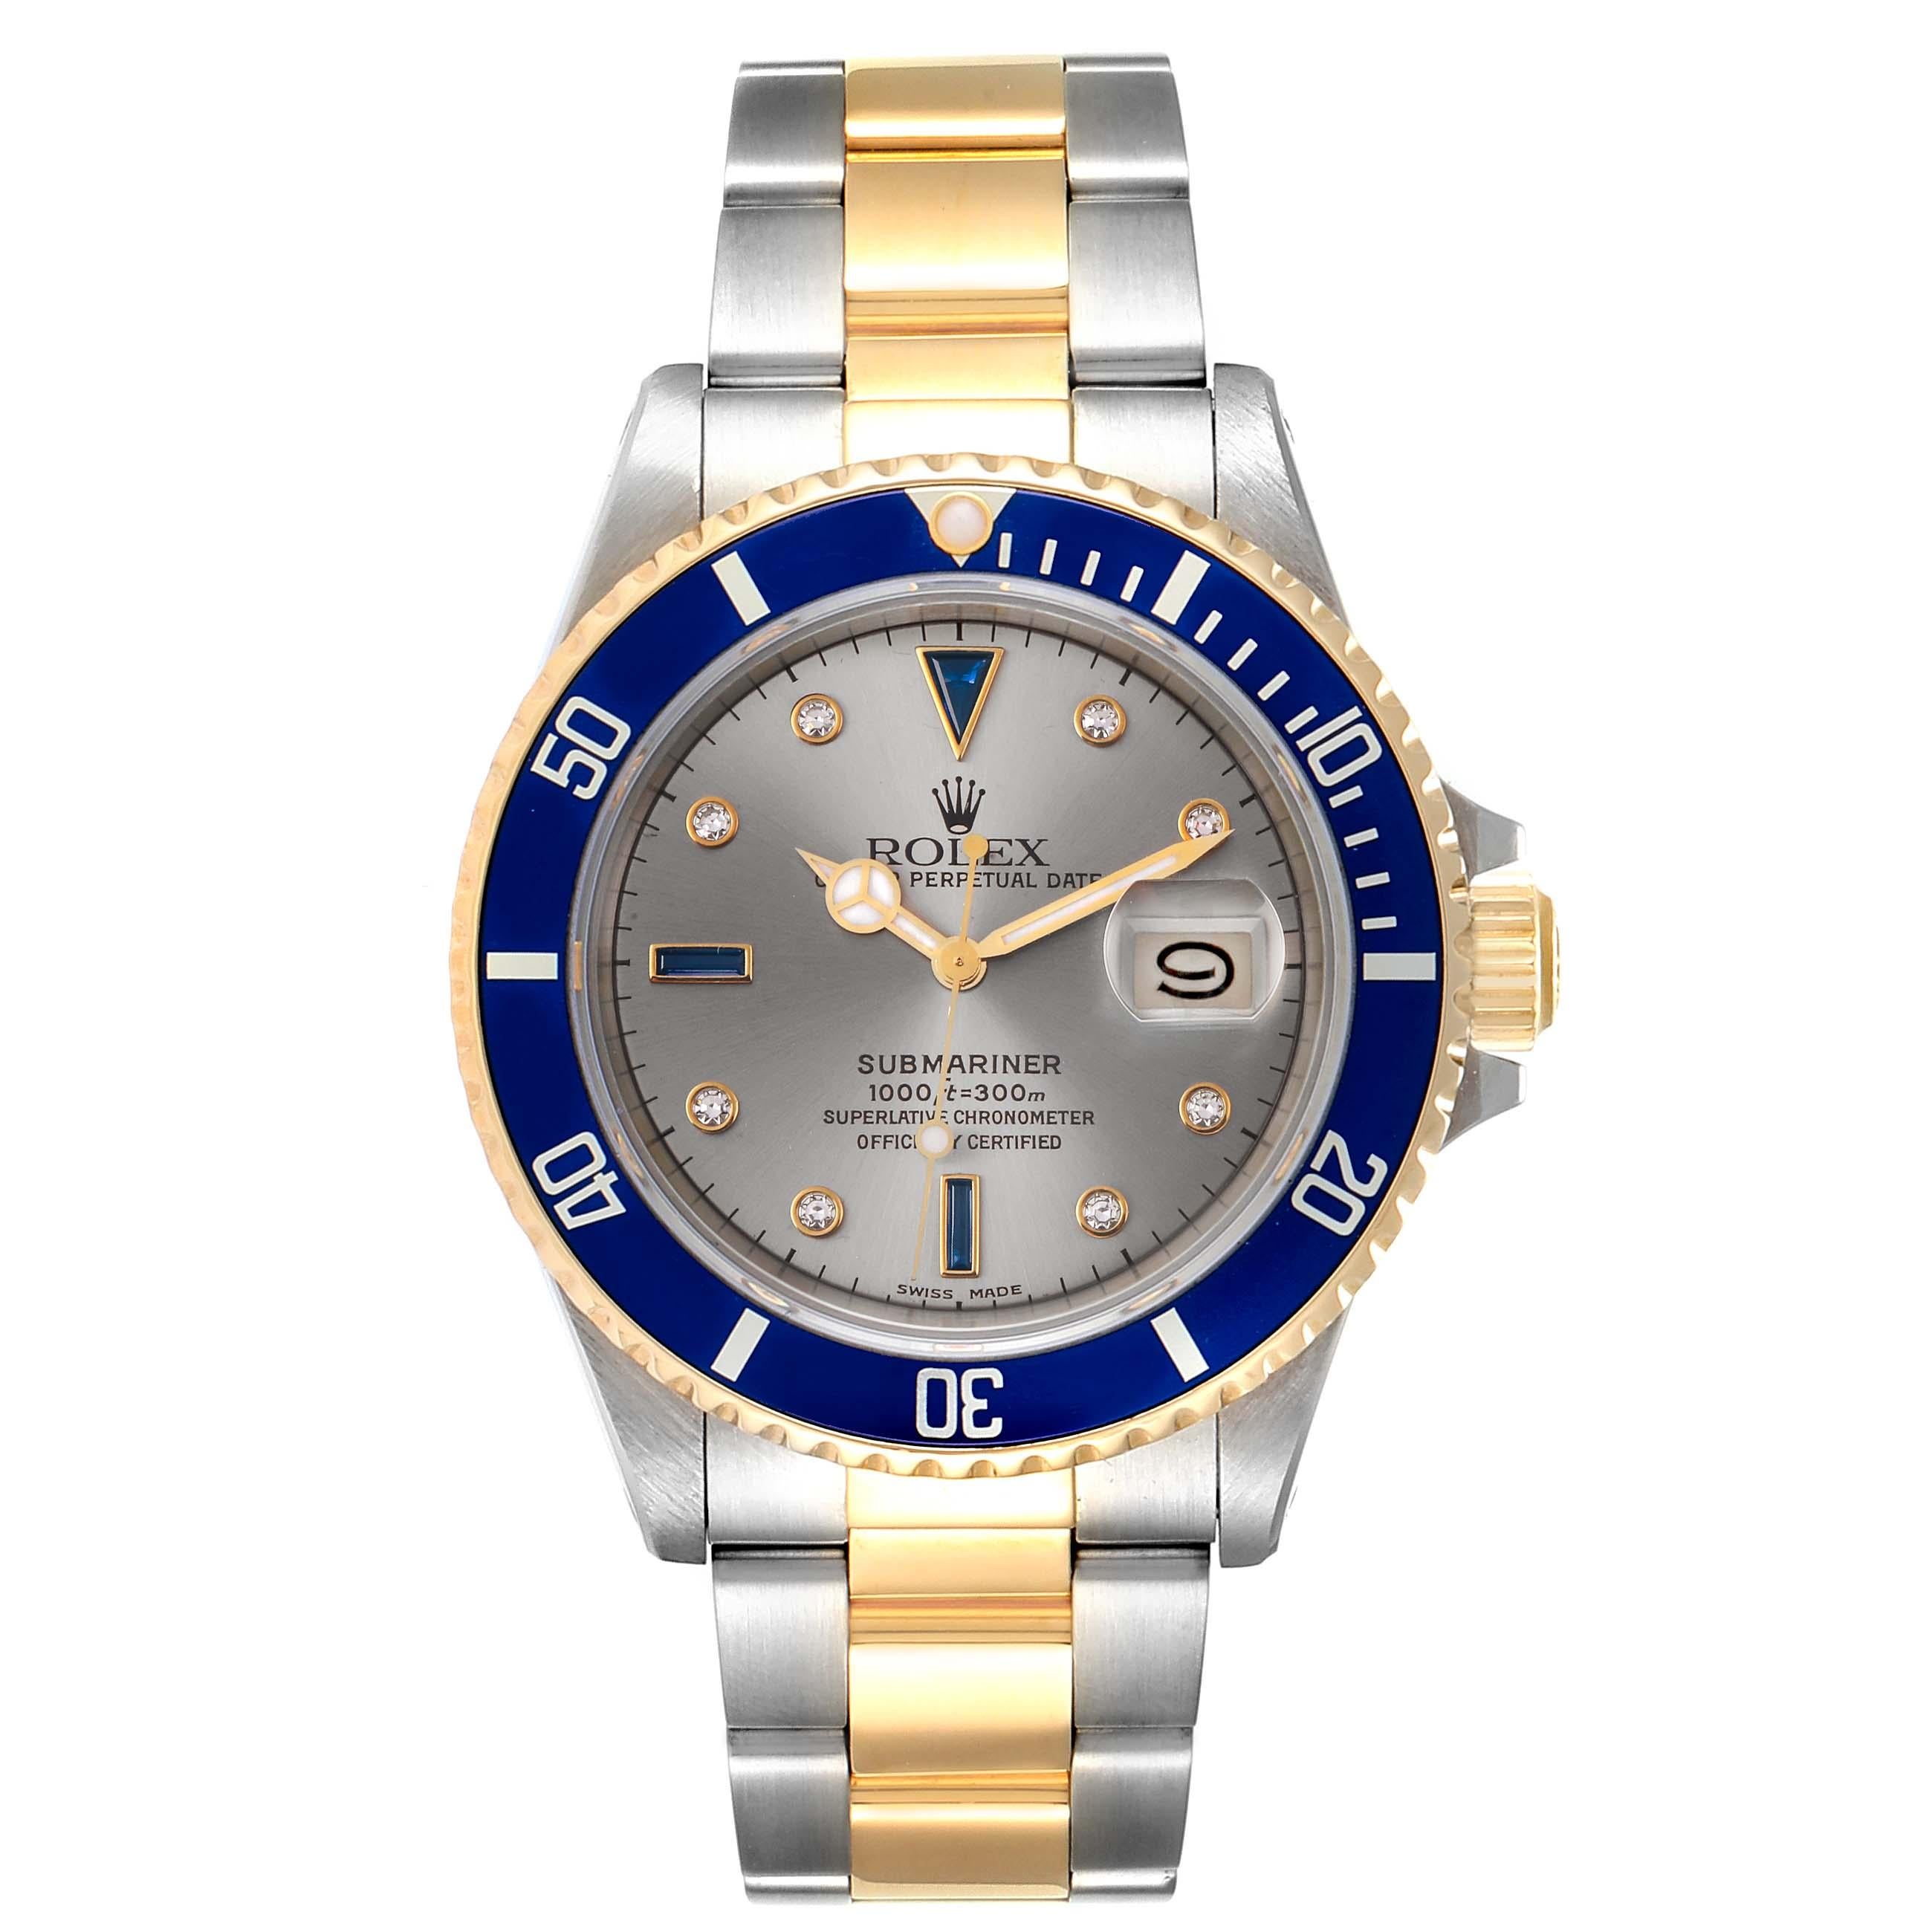 Rolex Submariner Steel Gold Slate Diamond Sapphire Serti Dial Watch 16803. Officially certified chronometer self-winding movement. Stainless steel and 18k yellow gold case 40.0 mm in diameter. Rolex logo on a crown. Blue insert special time-lapse